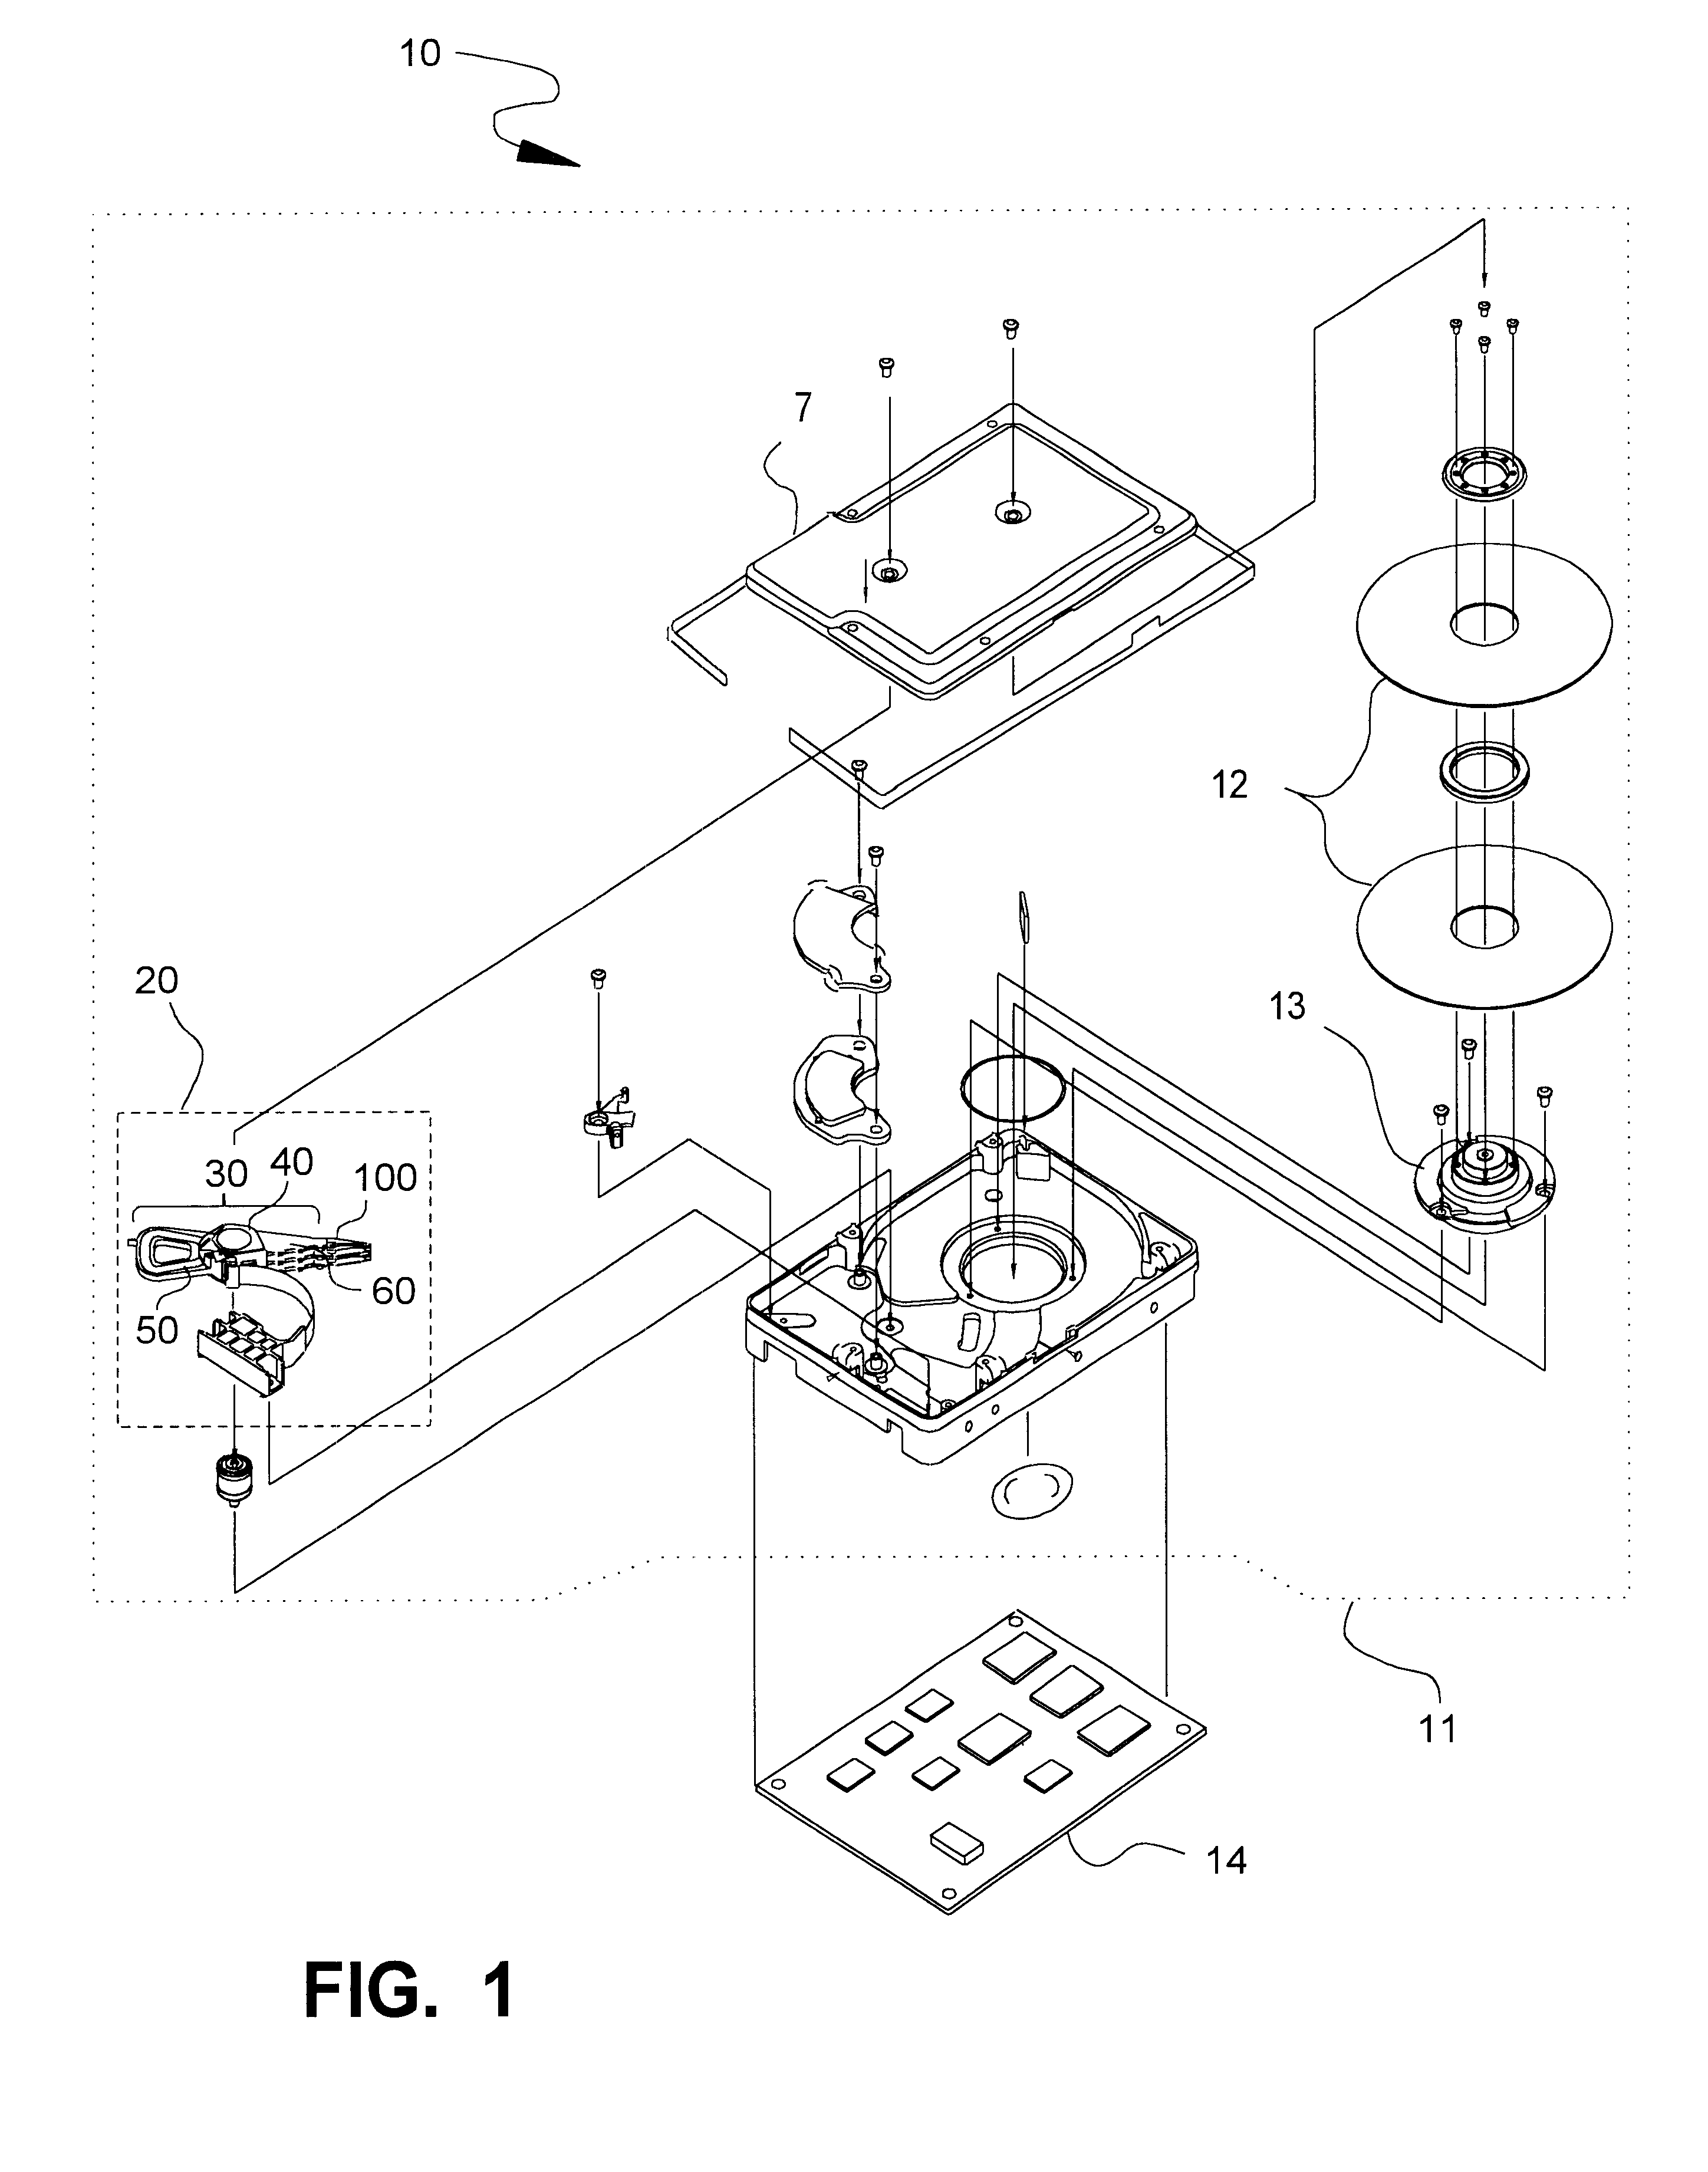 Disk drive with method of constructing a continuous position signal and constrained method of linearizing such position signal while maintaining continuity